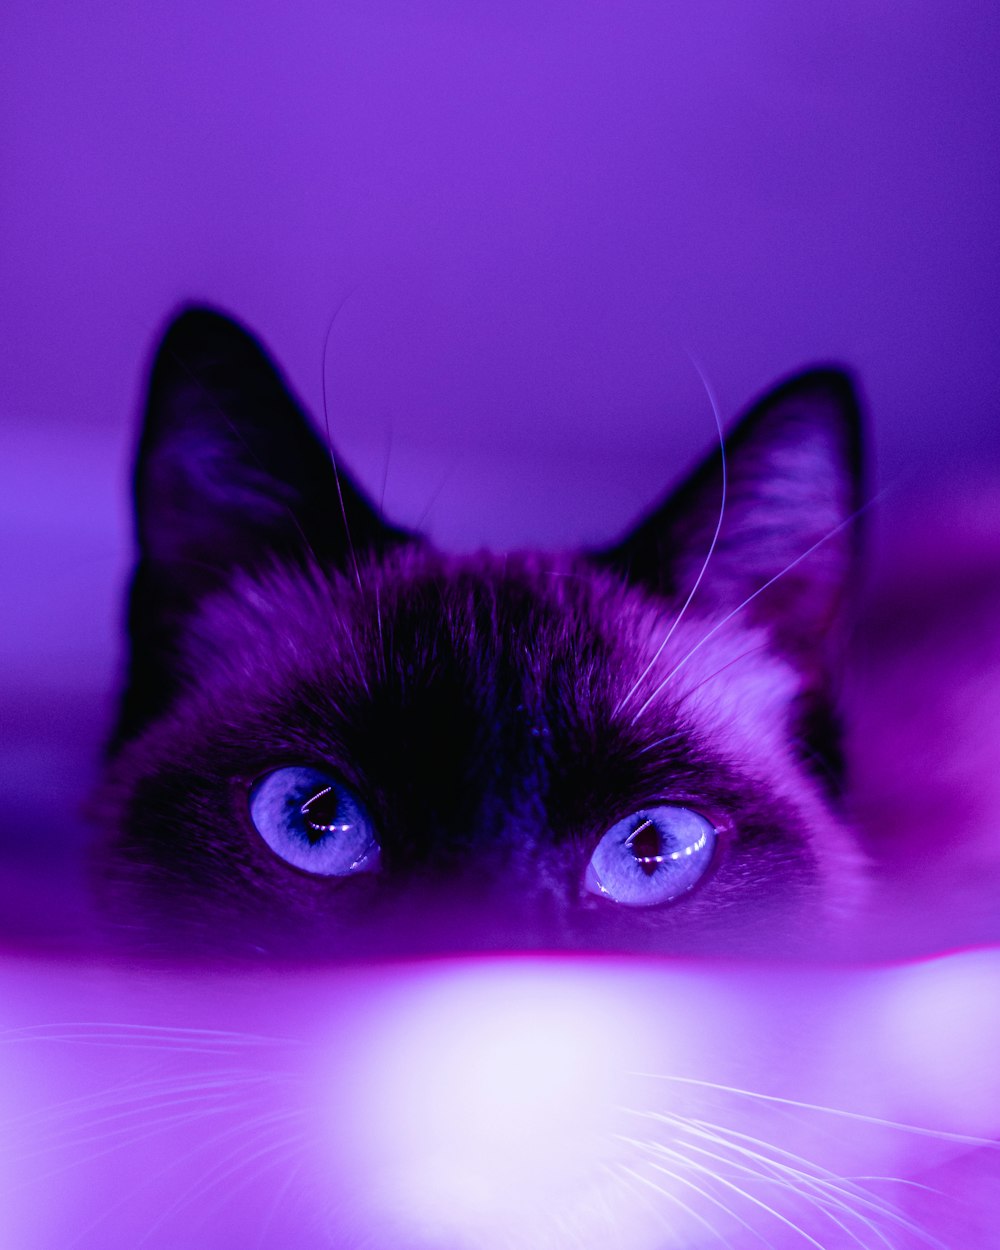 black cat  in pink  background photo Free Purple Image on 